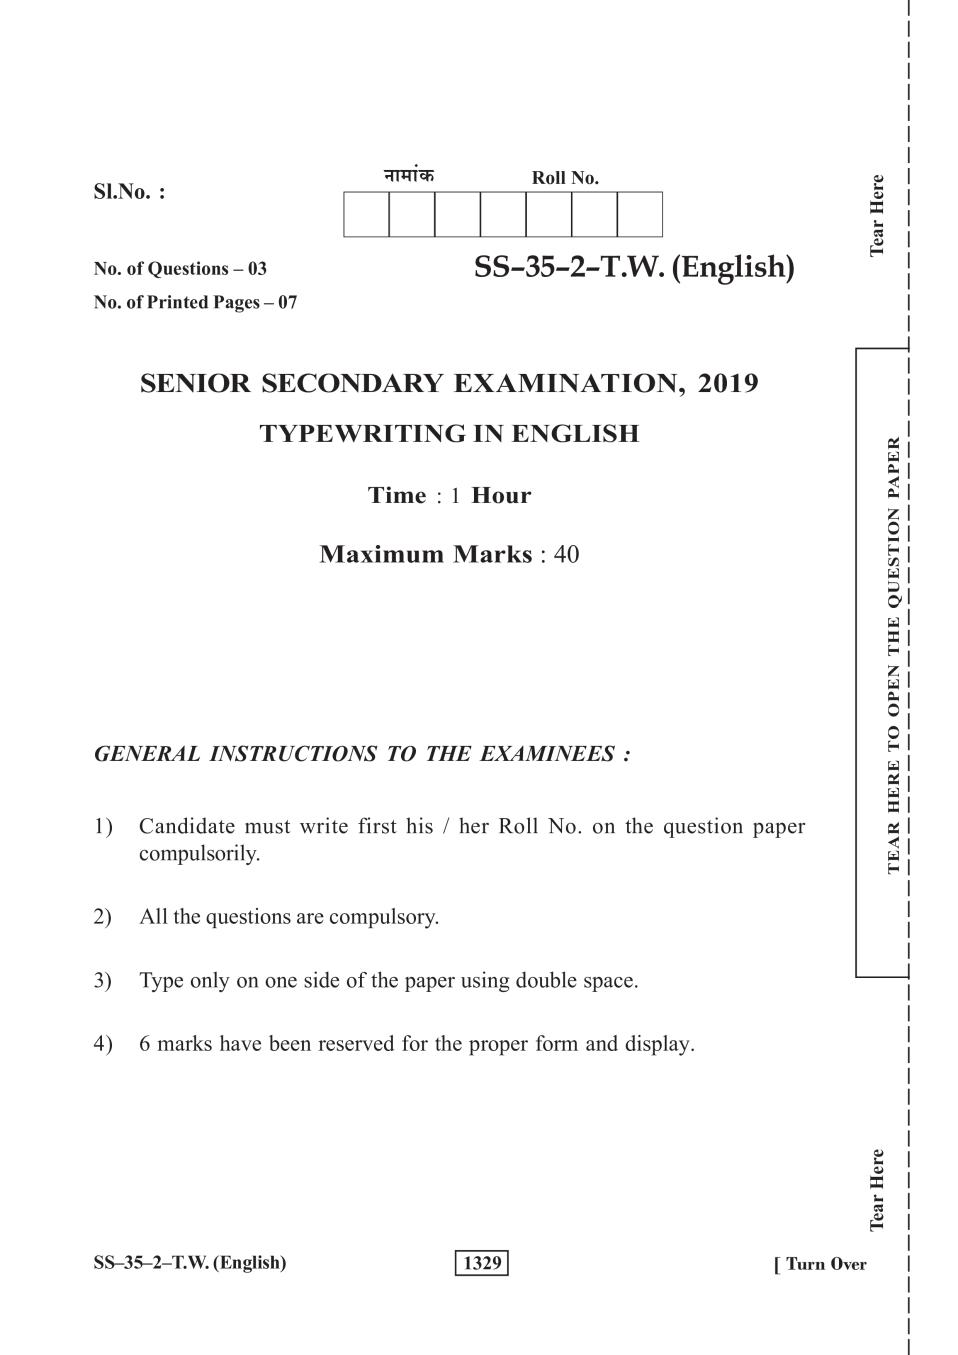 Rajasthan Board 12th Class Typewriting English Question Paper 2019 - Page 1